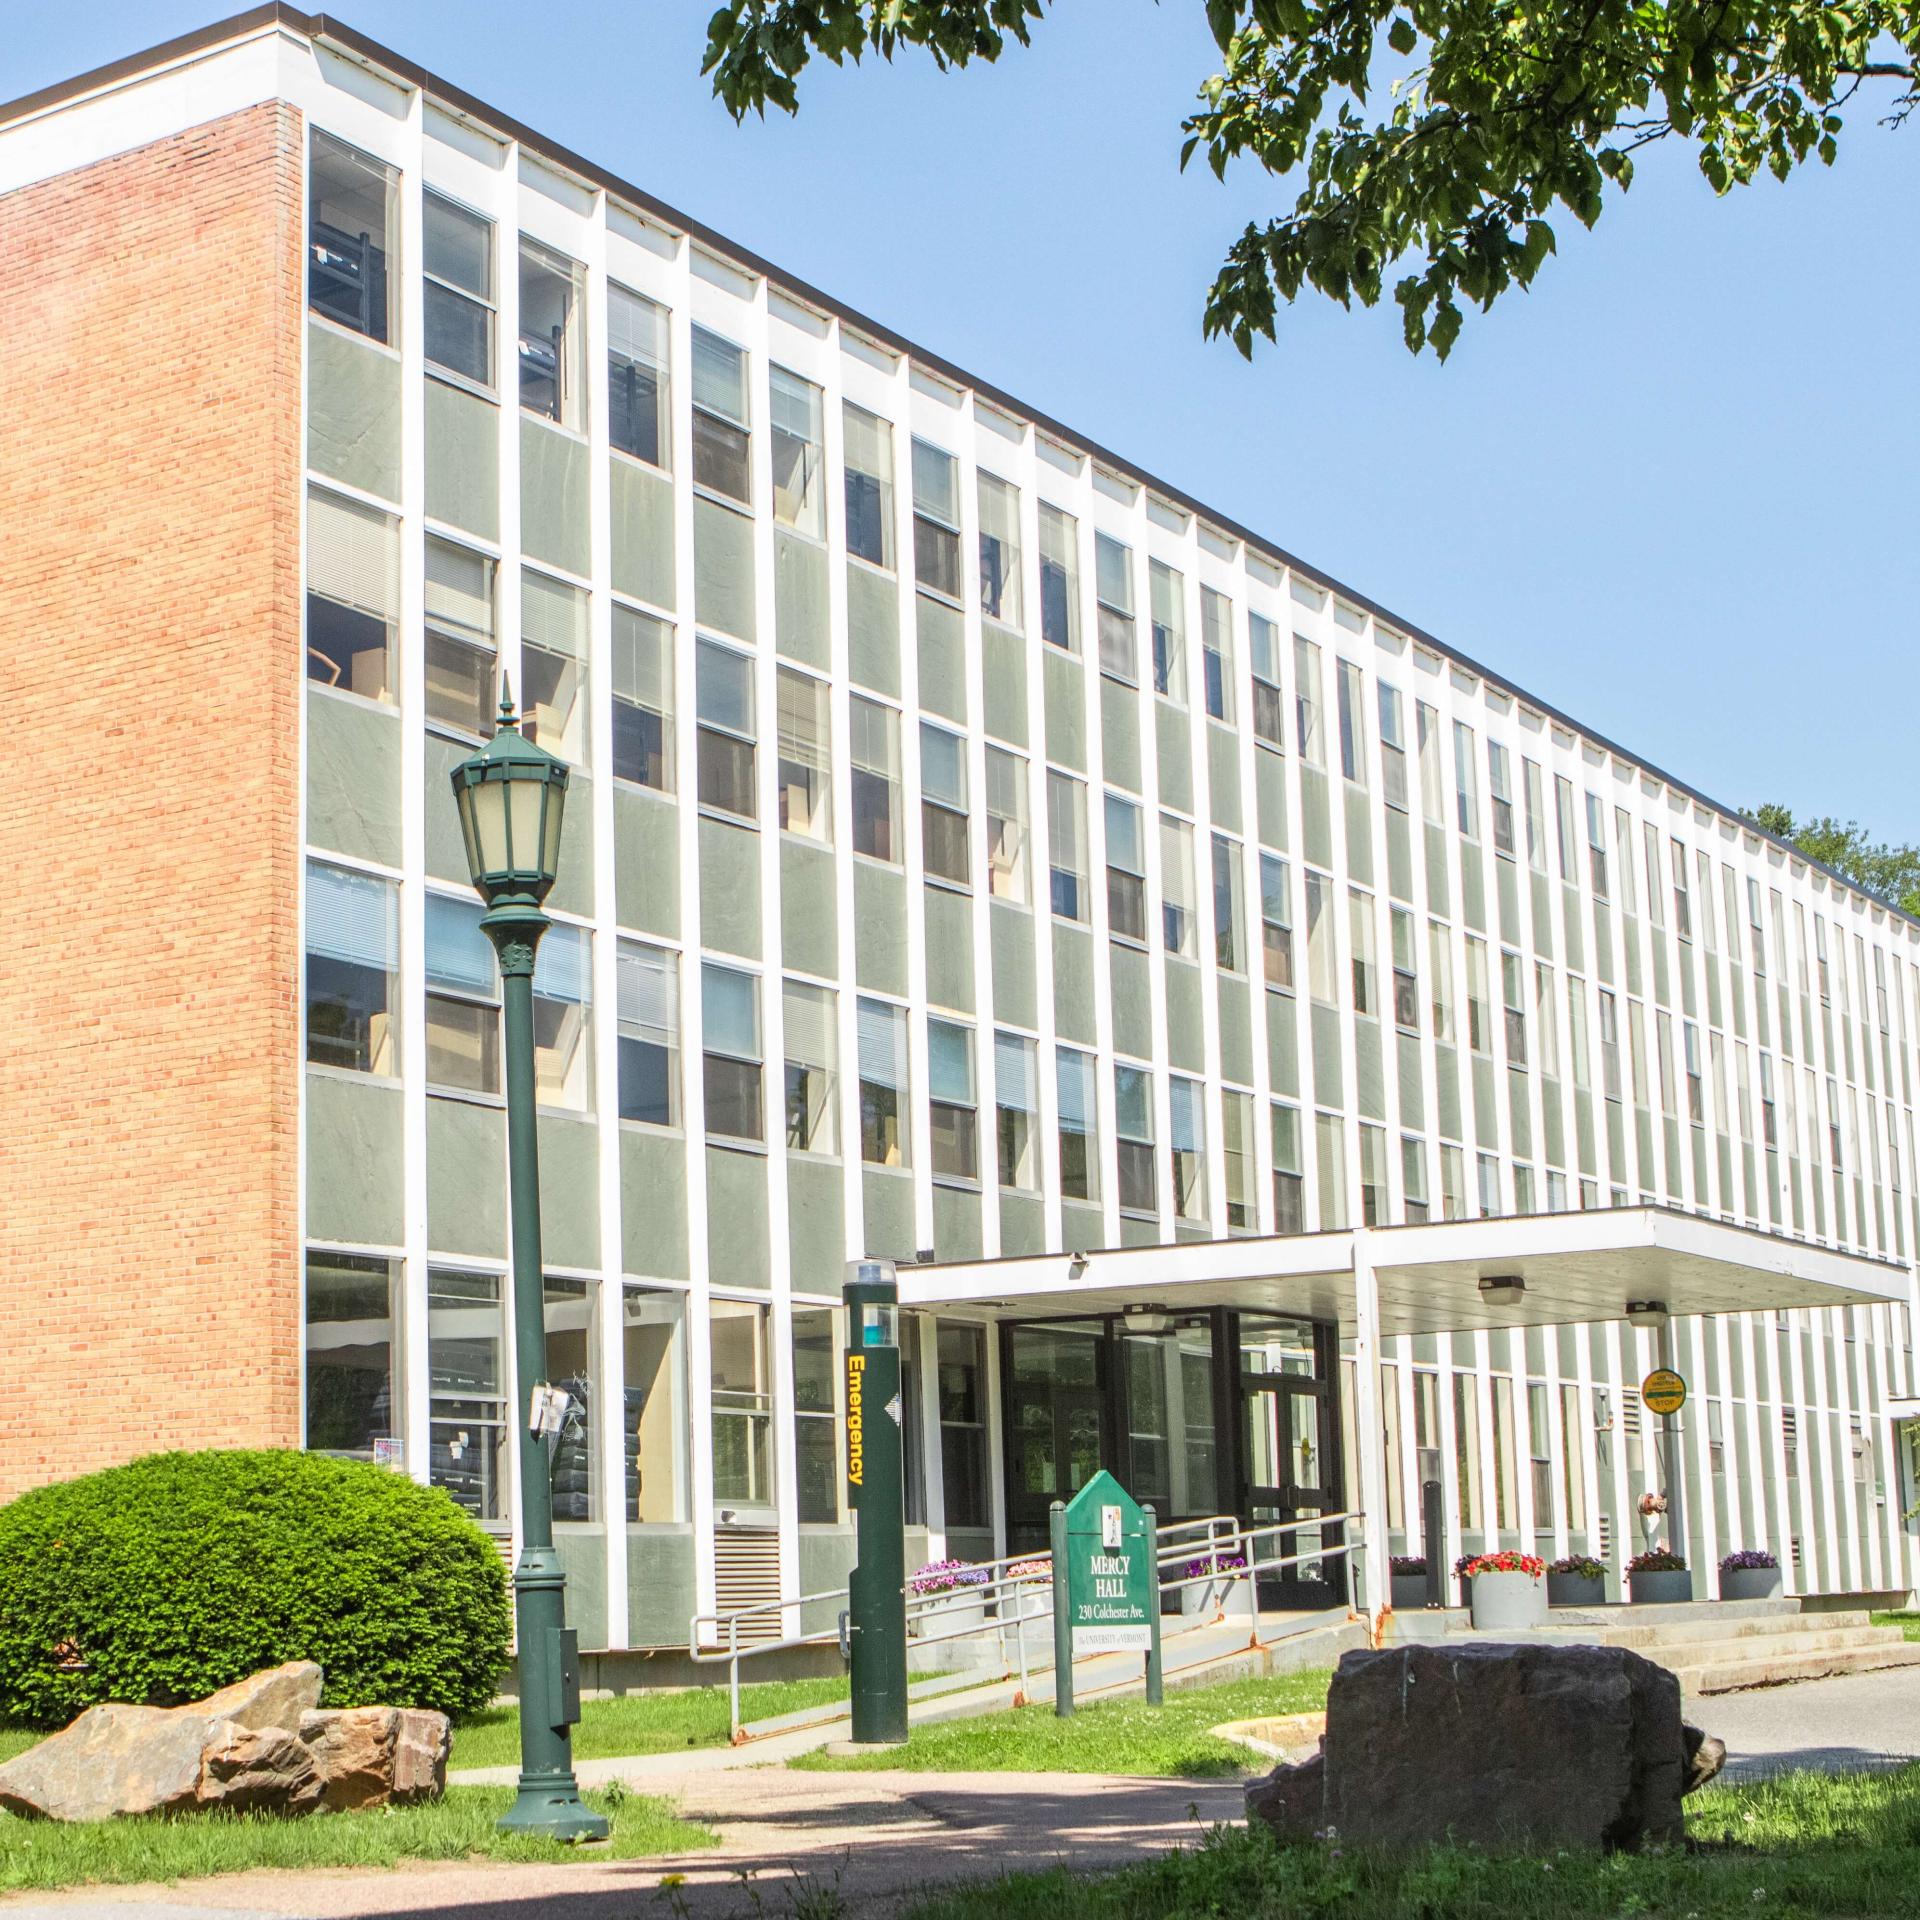 A four-story brick residence hall with a wall of windows. 